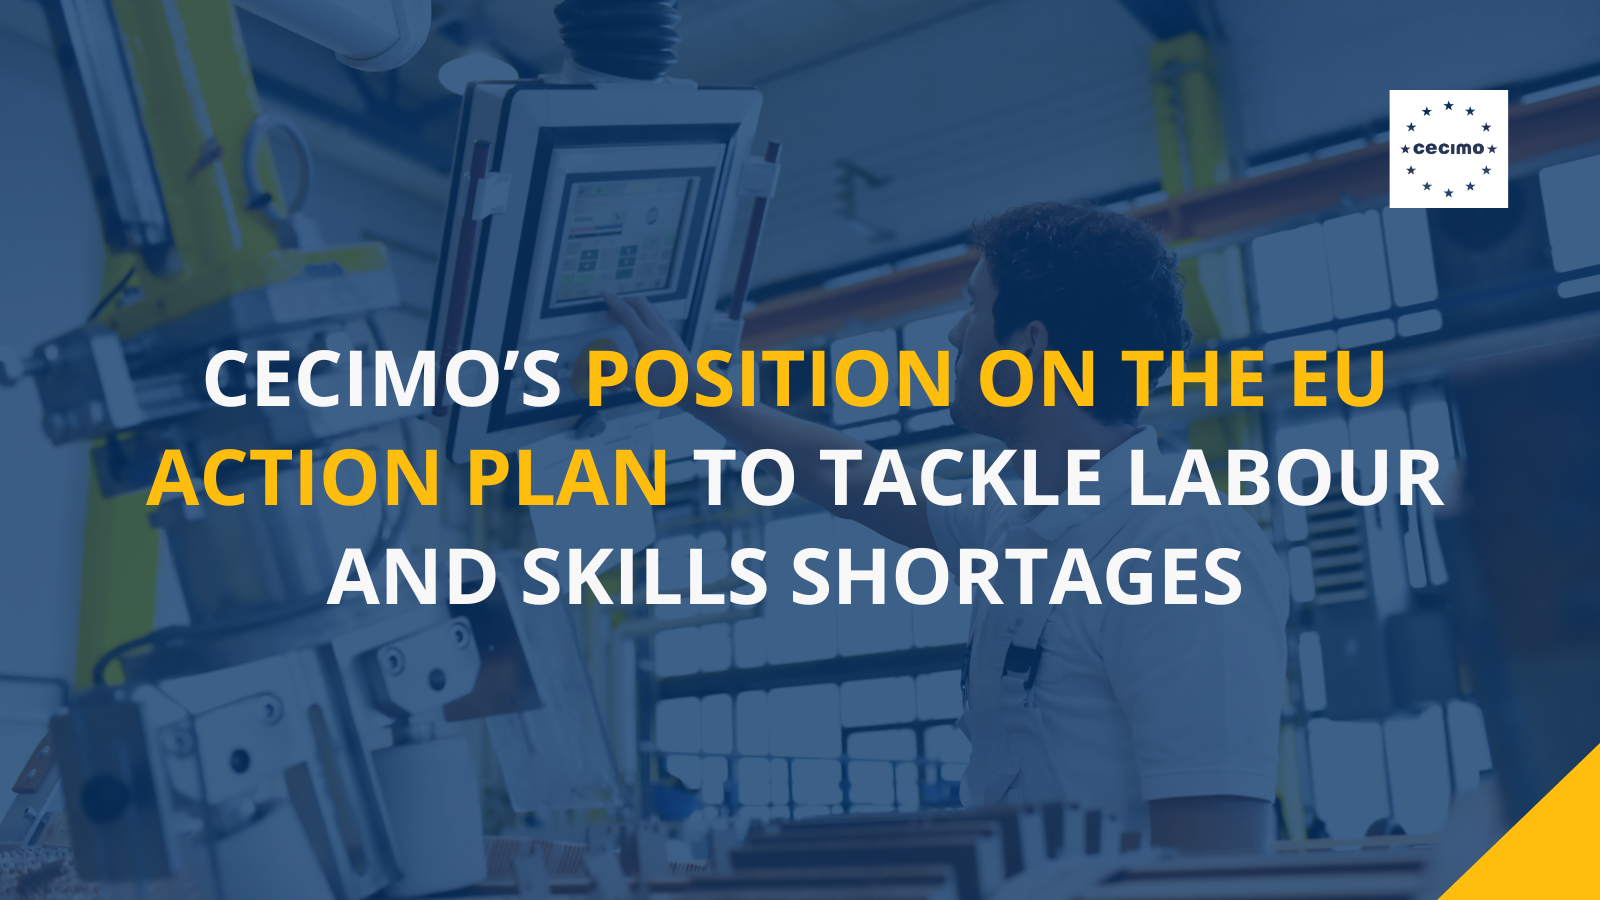 CECIMO’s Position on the EU Action Plan to Tackle Labour and Skills Shortages